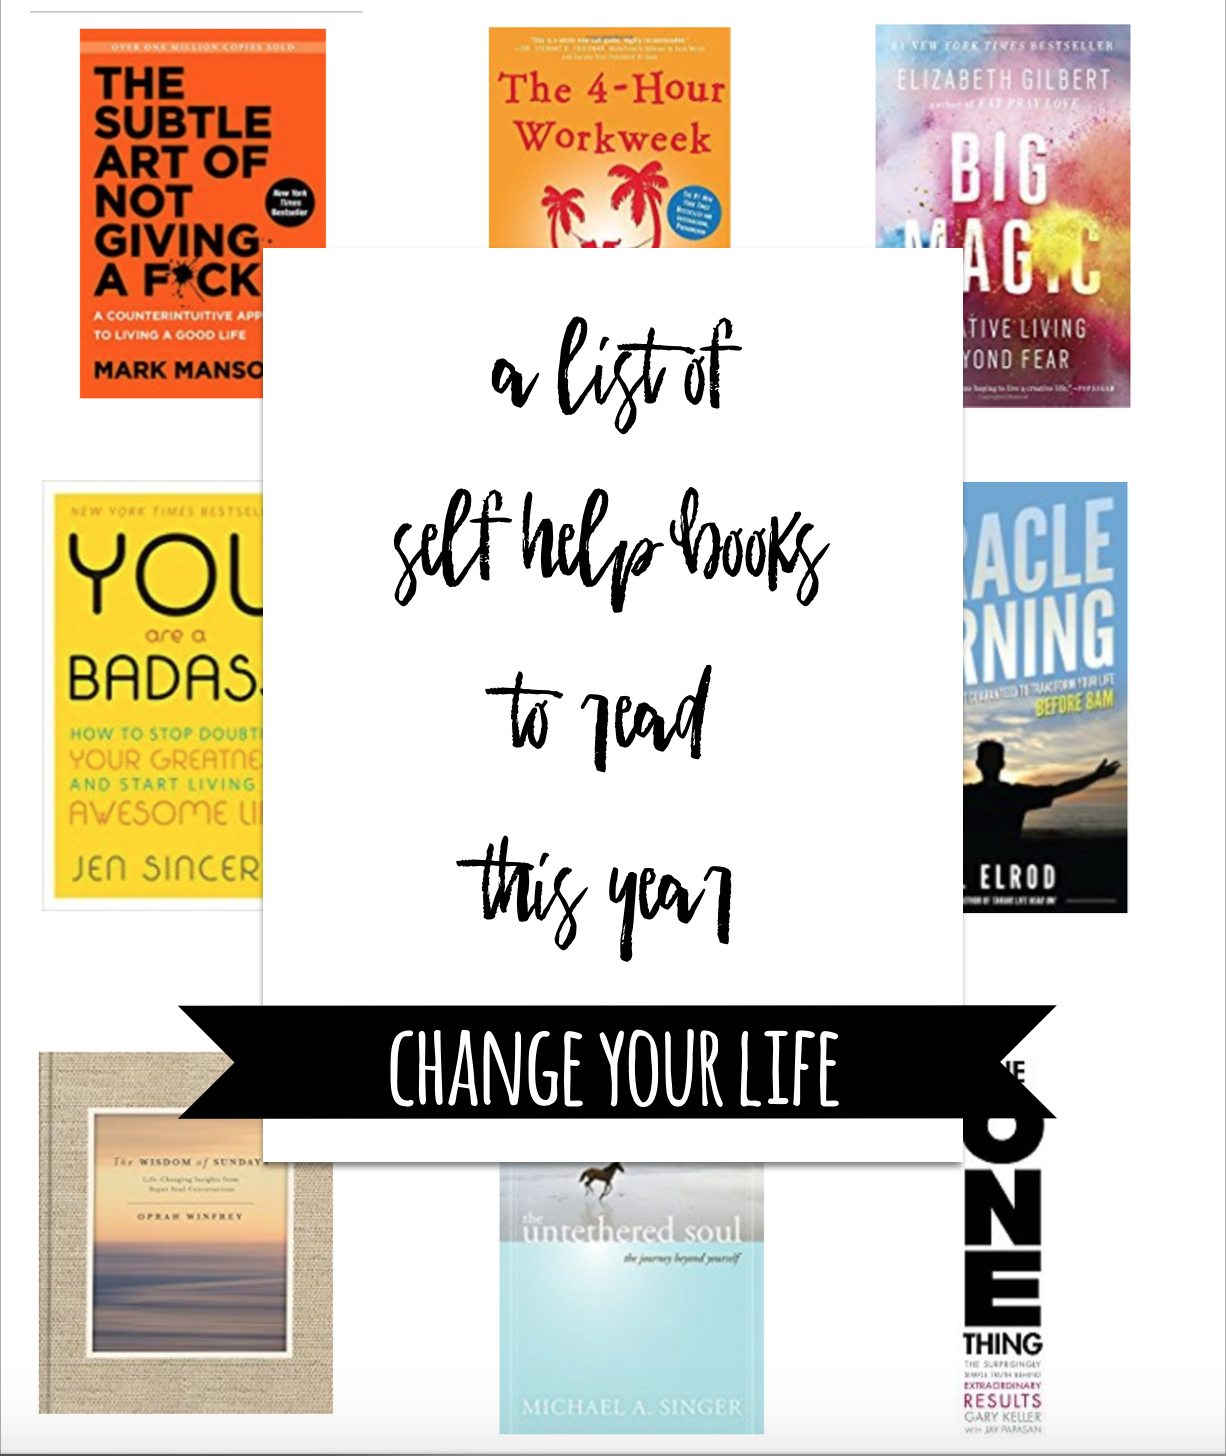 Best Self Help Books To Read To Change Your Life!